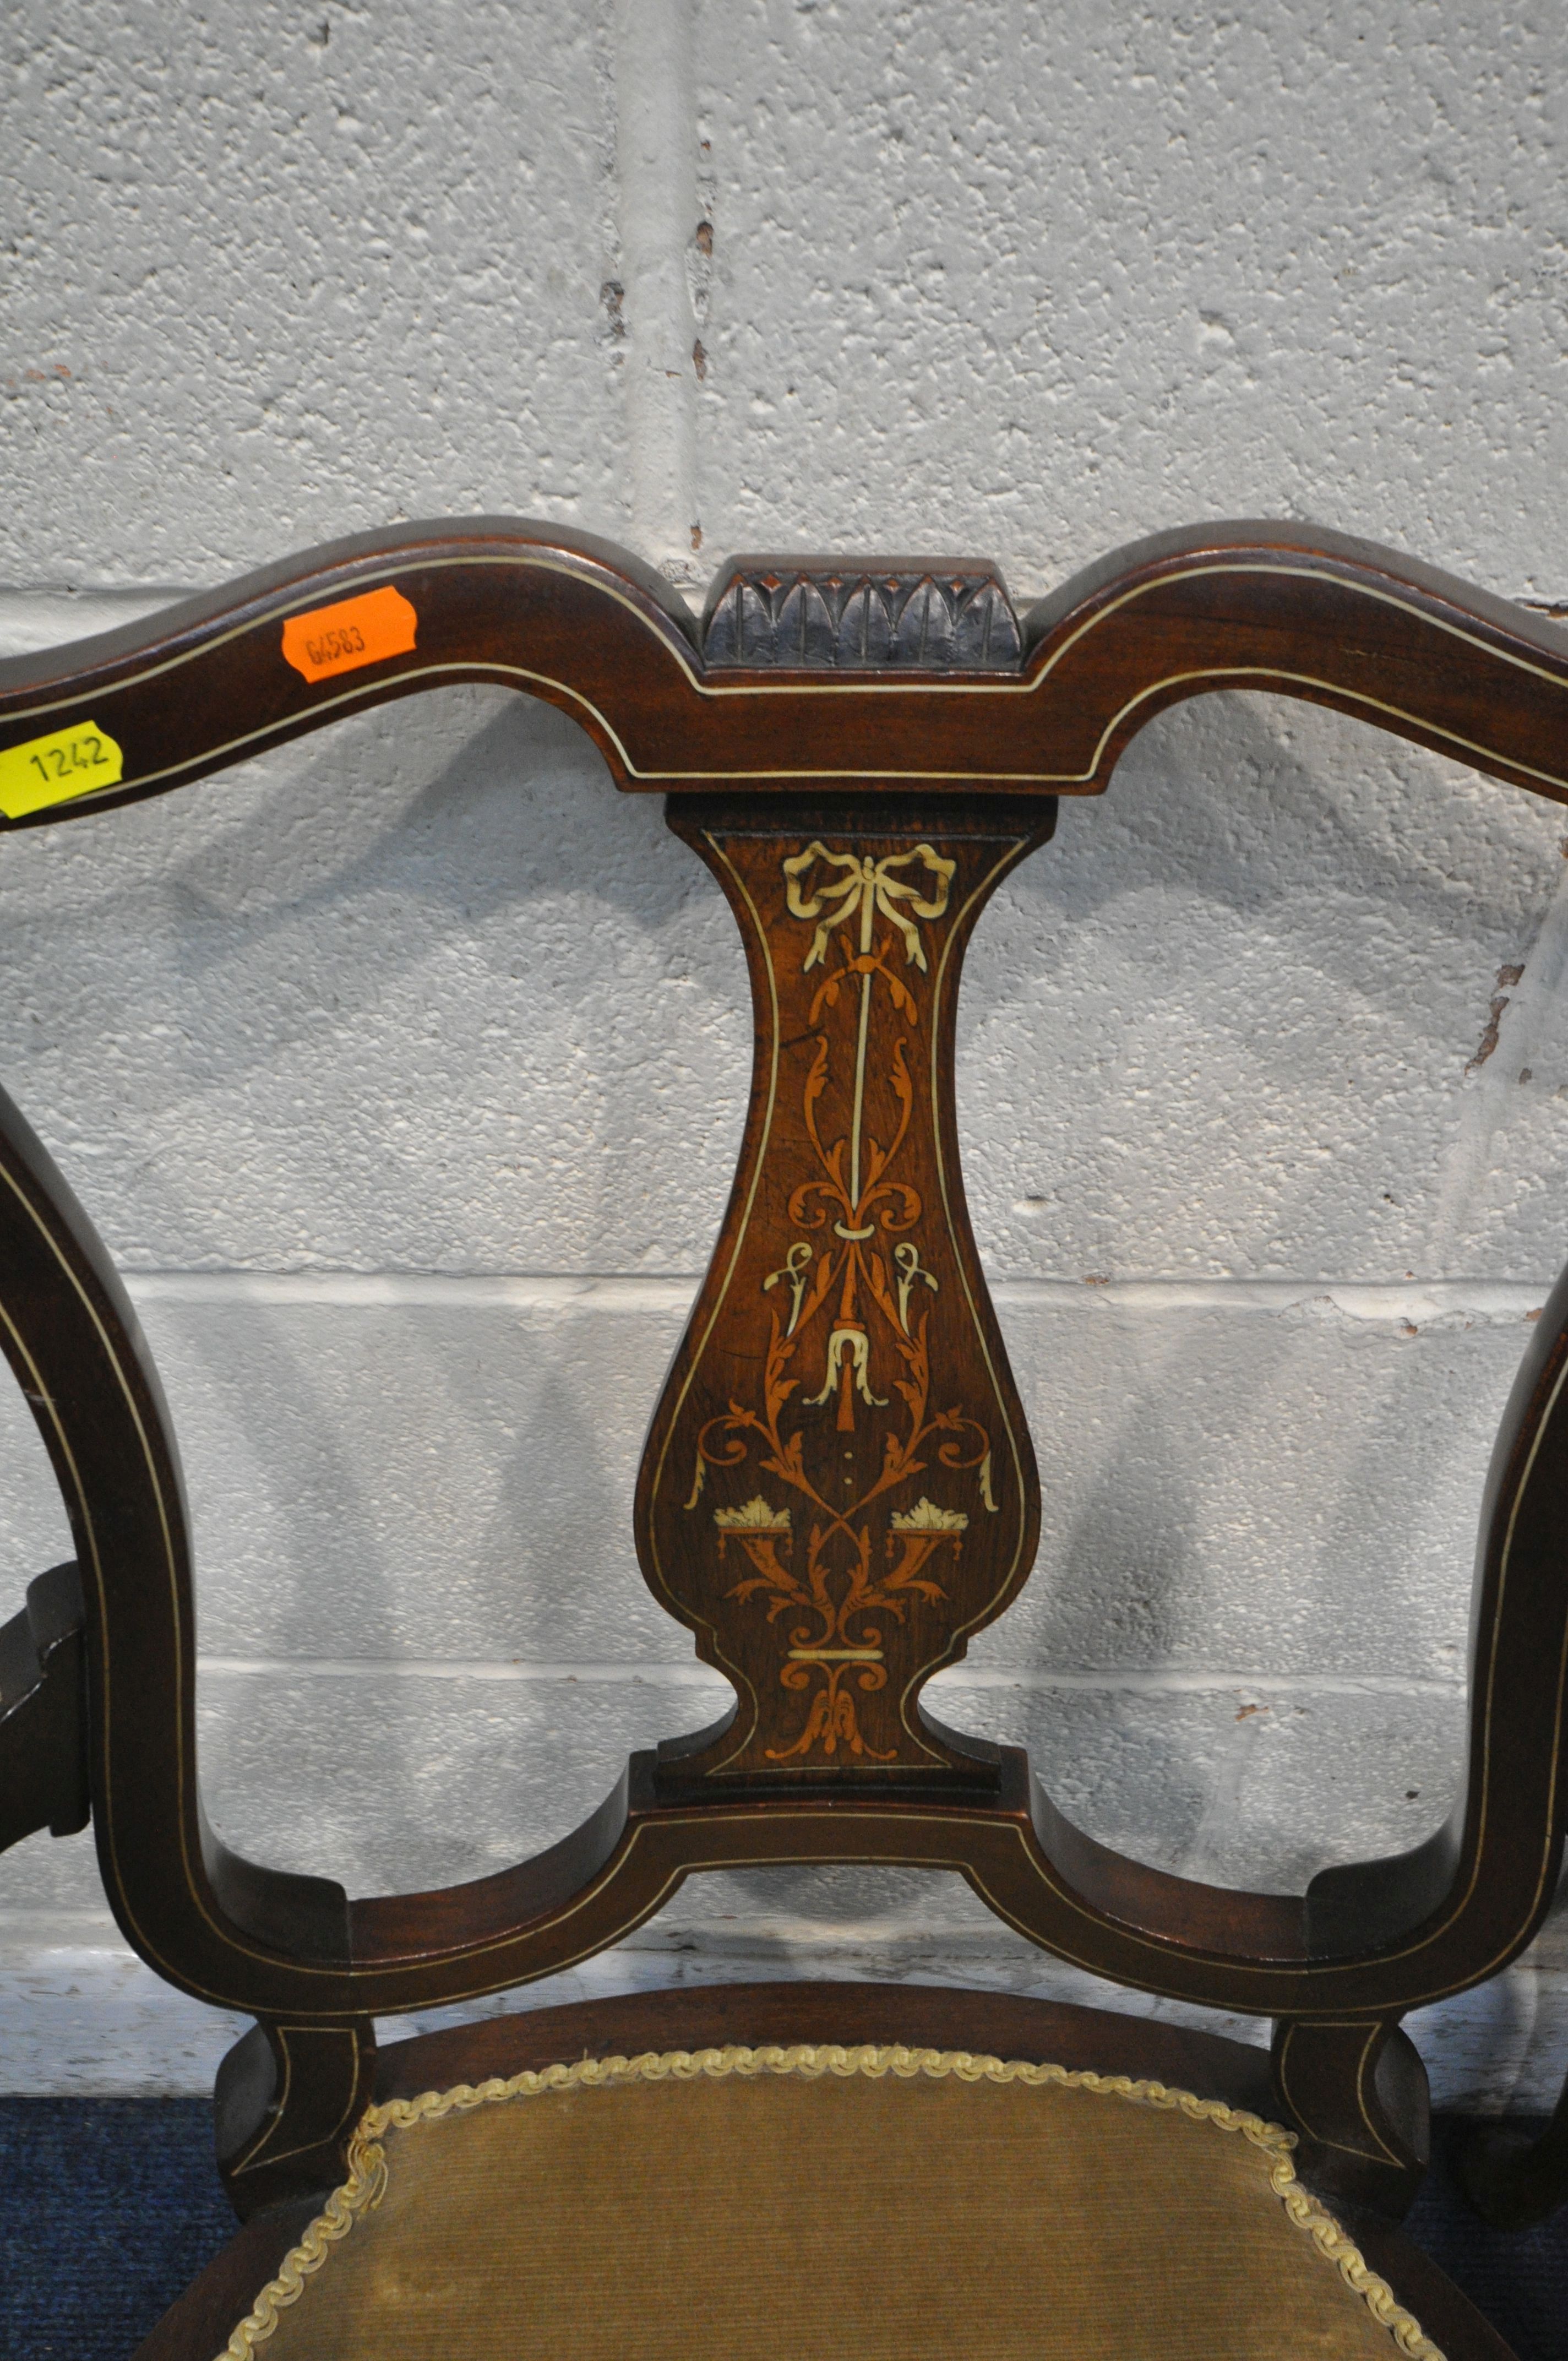 AN EDWARDIAN MAHOGANY AND INLAID CHAIR, with splat back, open armrests, on front cabriole legs, - Image 3 of 4